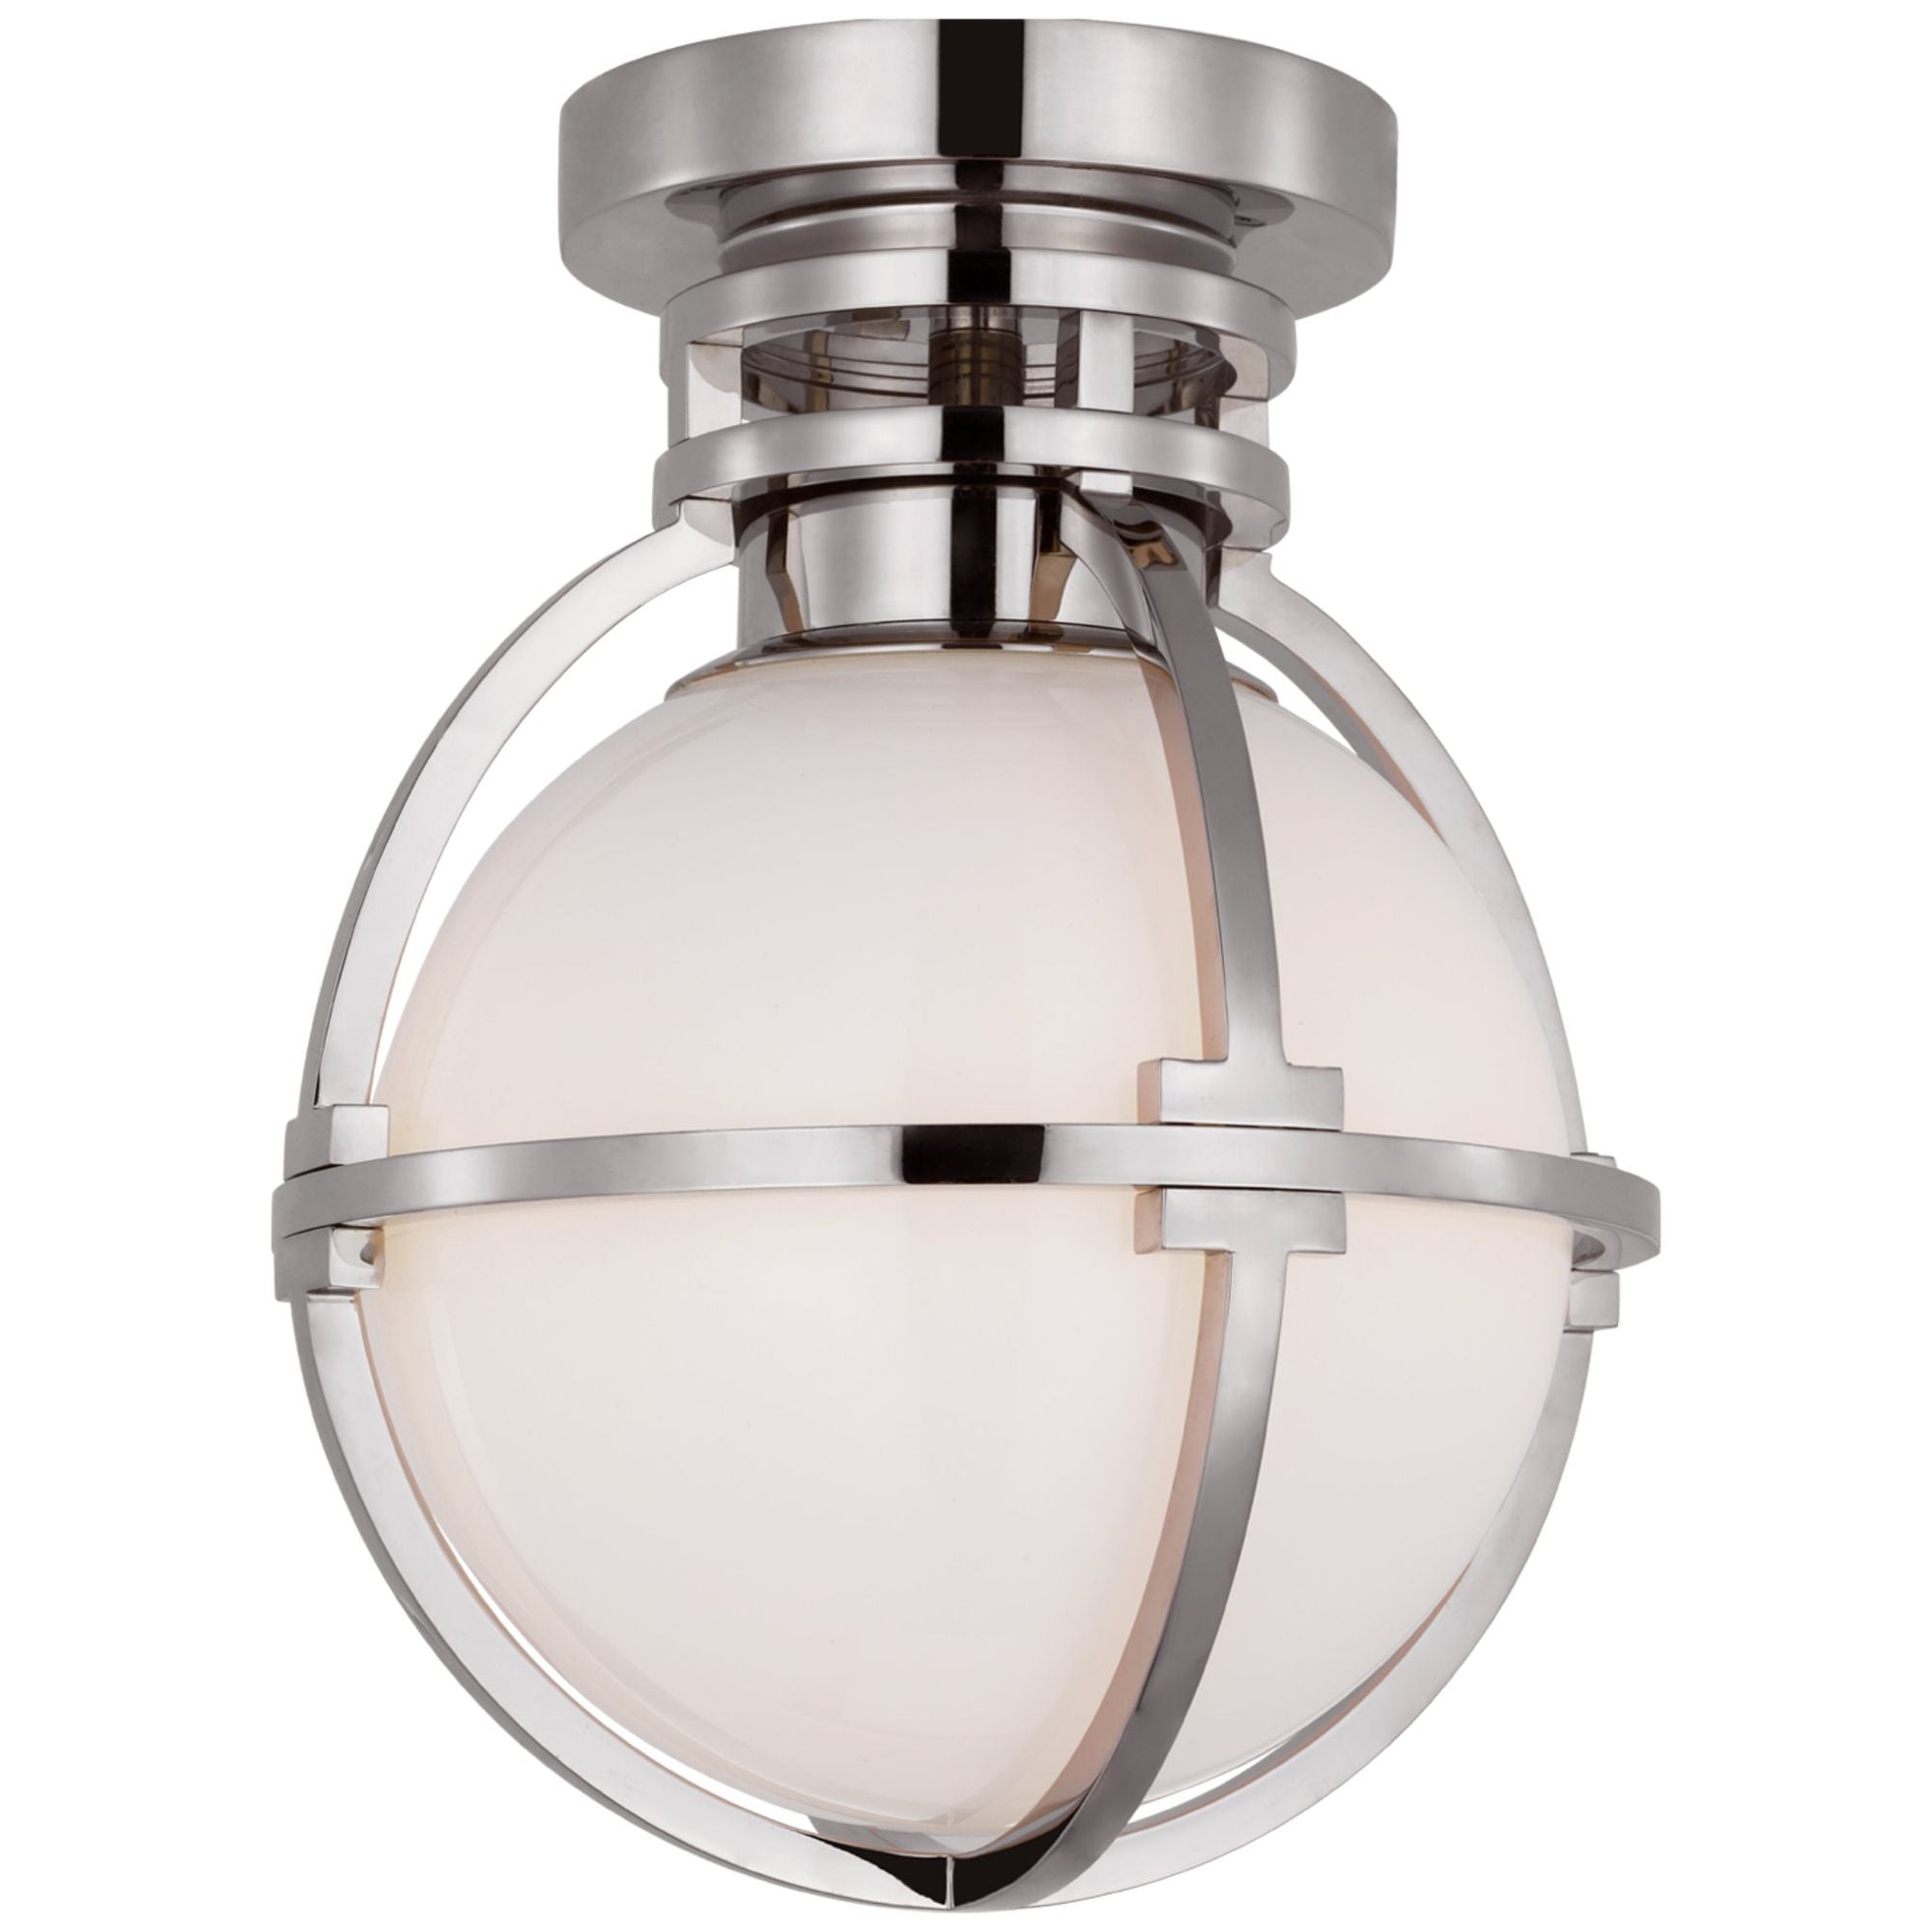 Chapman & Myers Gracie 7" Captured Globe Flush Mount in Polished Nickel with White Glass